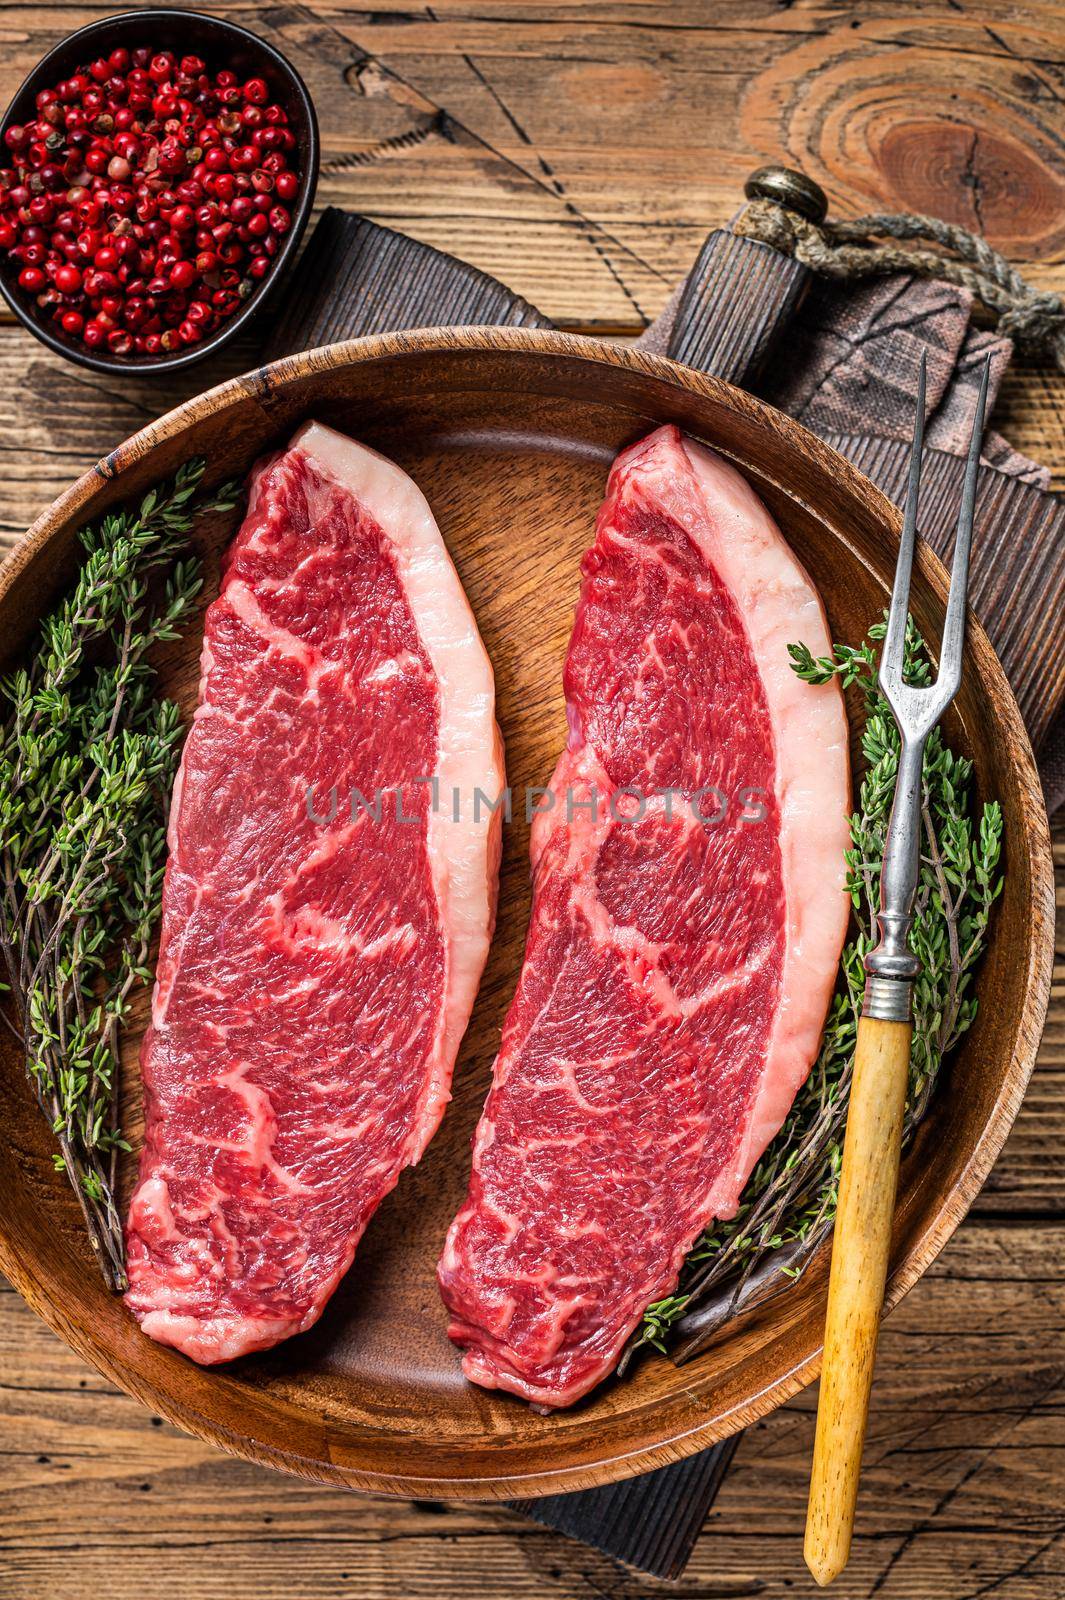 Uncooked Raw top sirloin cap beef meat steaks in a wooden plate with herbs. woden background. Top view.